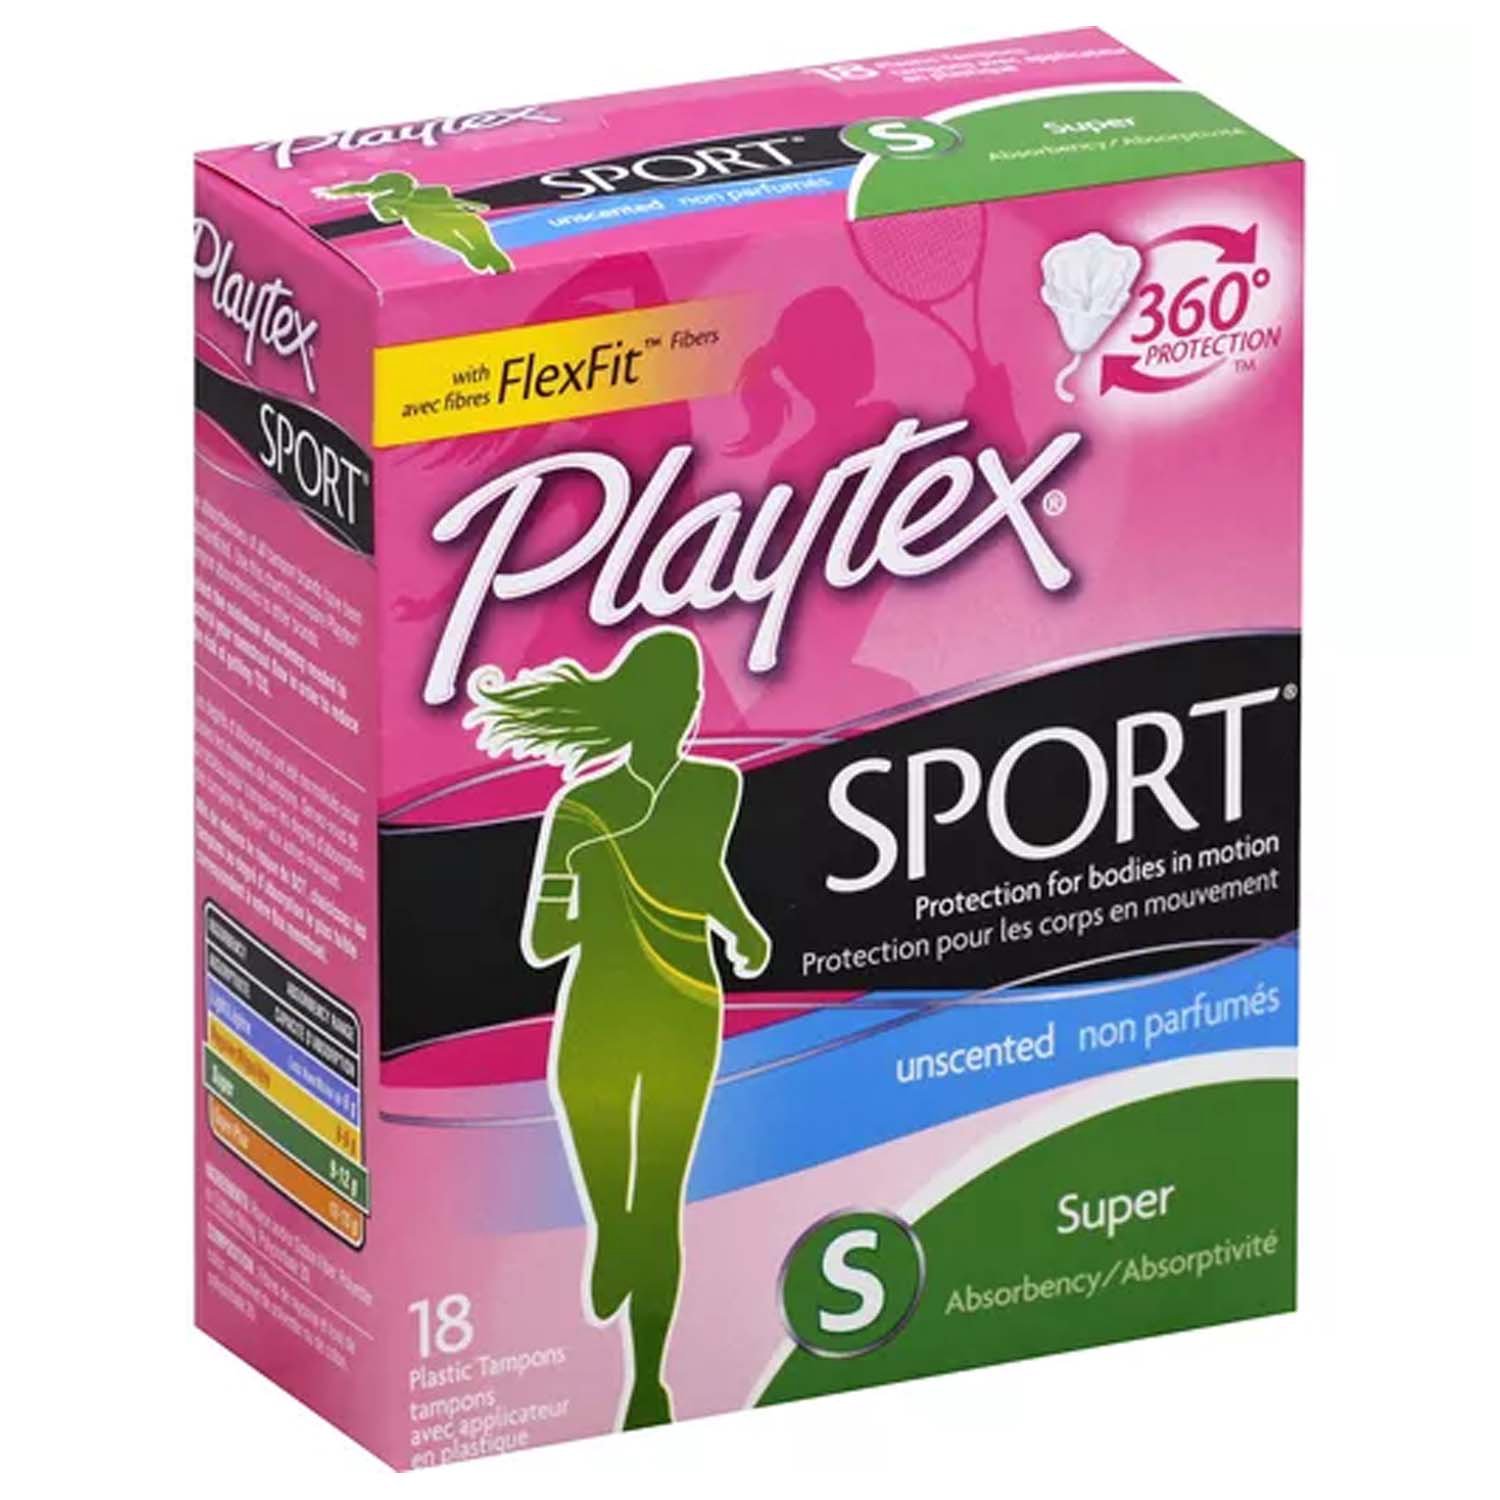 Playtex Sport Plastic Super Tampons, Unscented, PK216 08111